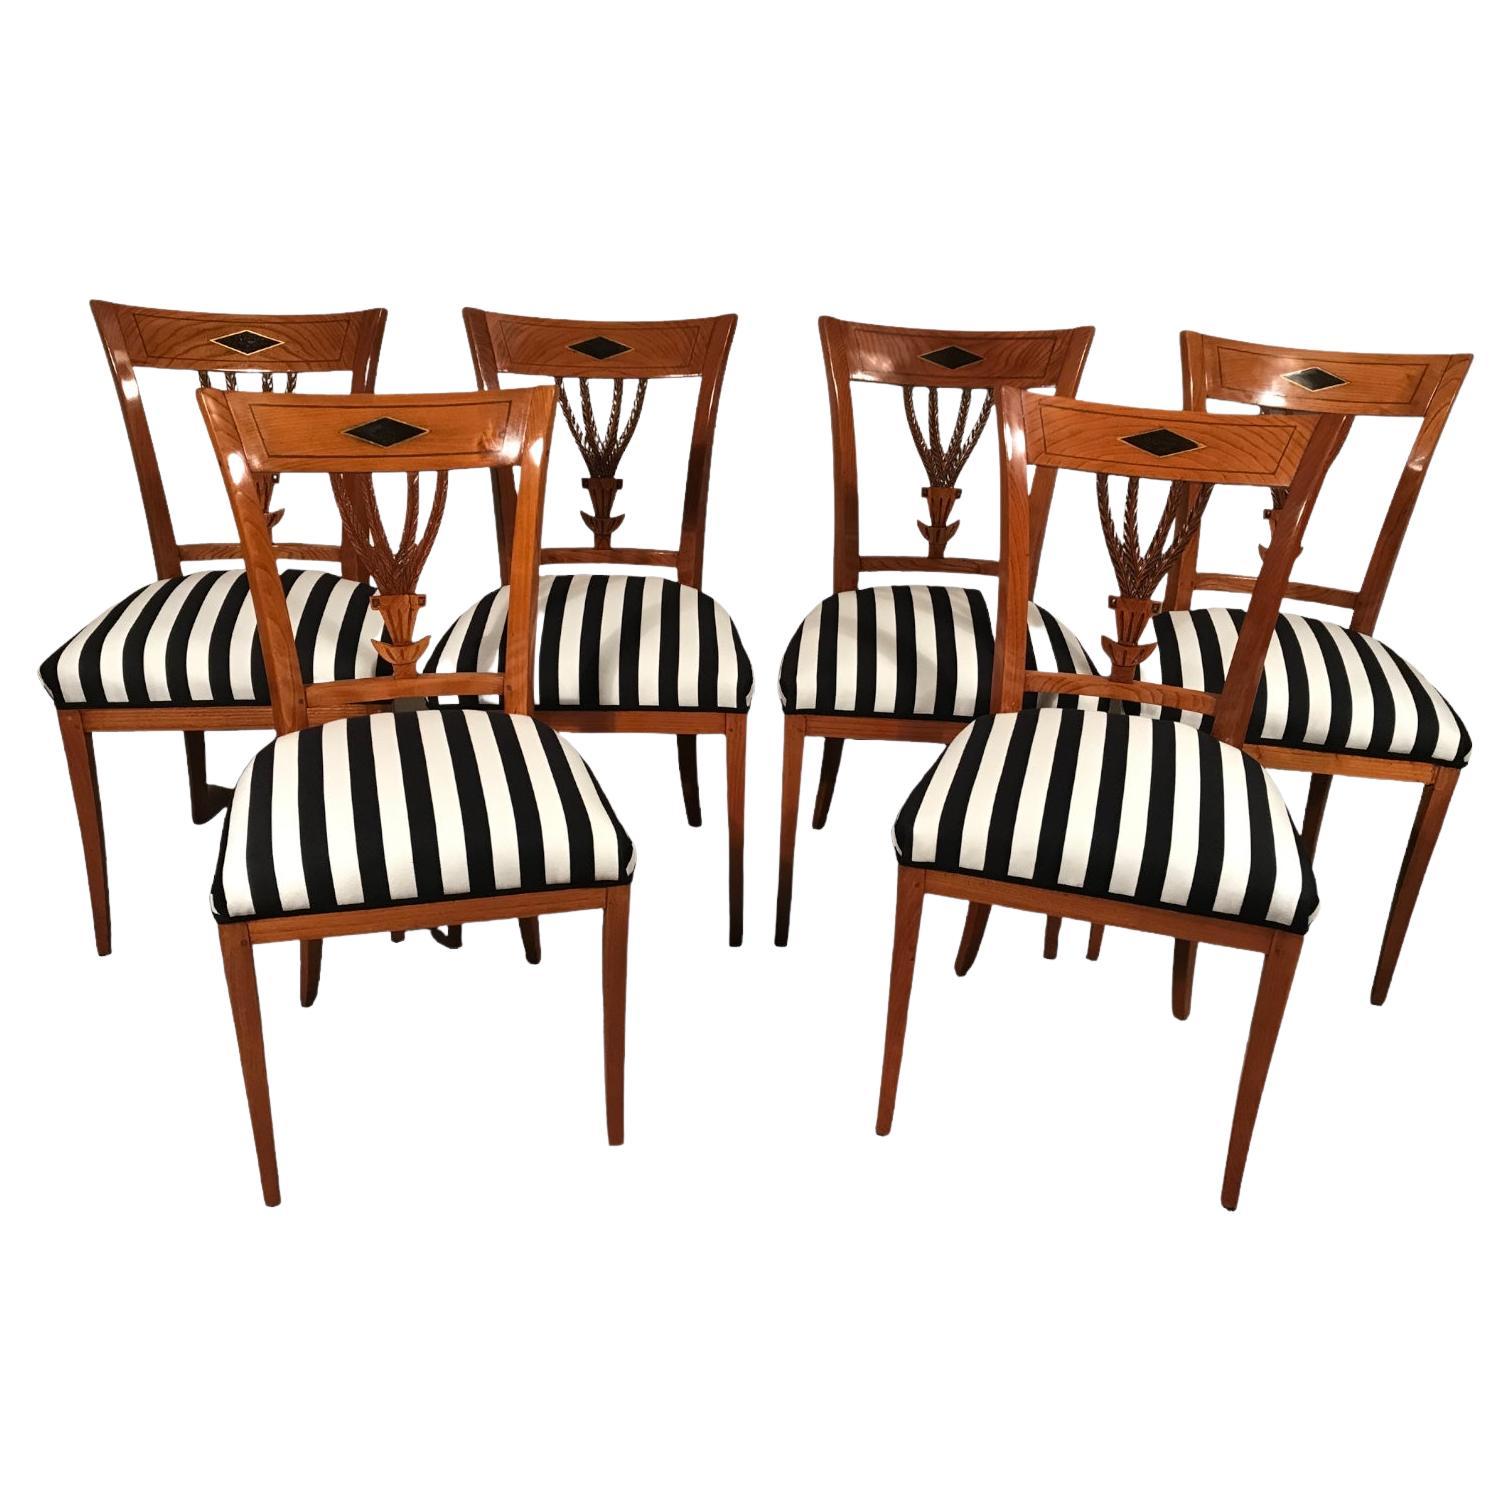 Set of six Neoclassical Dining Room Chairs, Germany 1810-30 For Sale